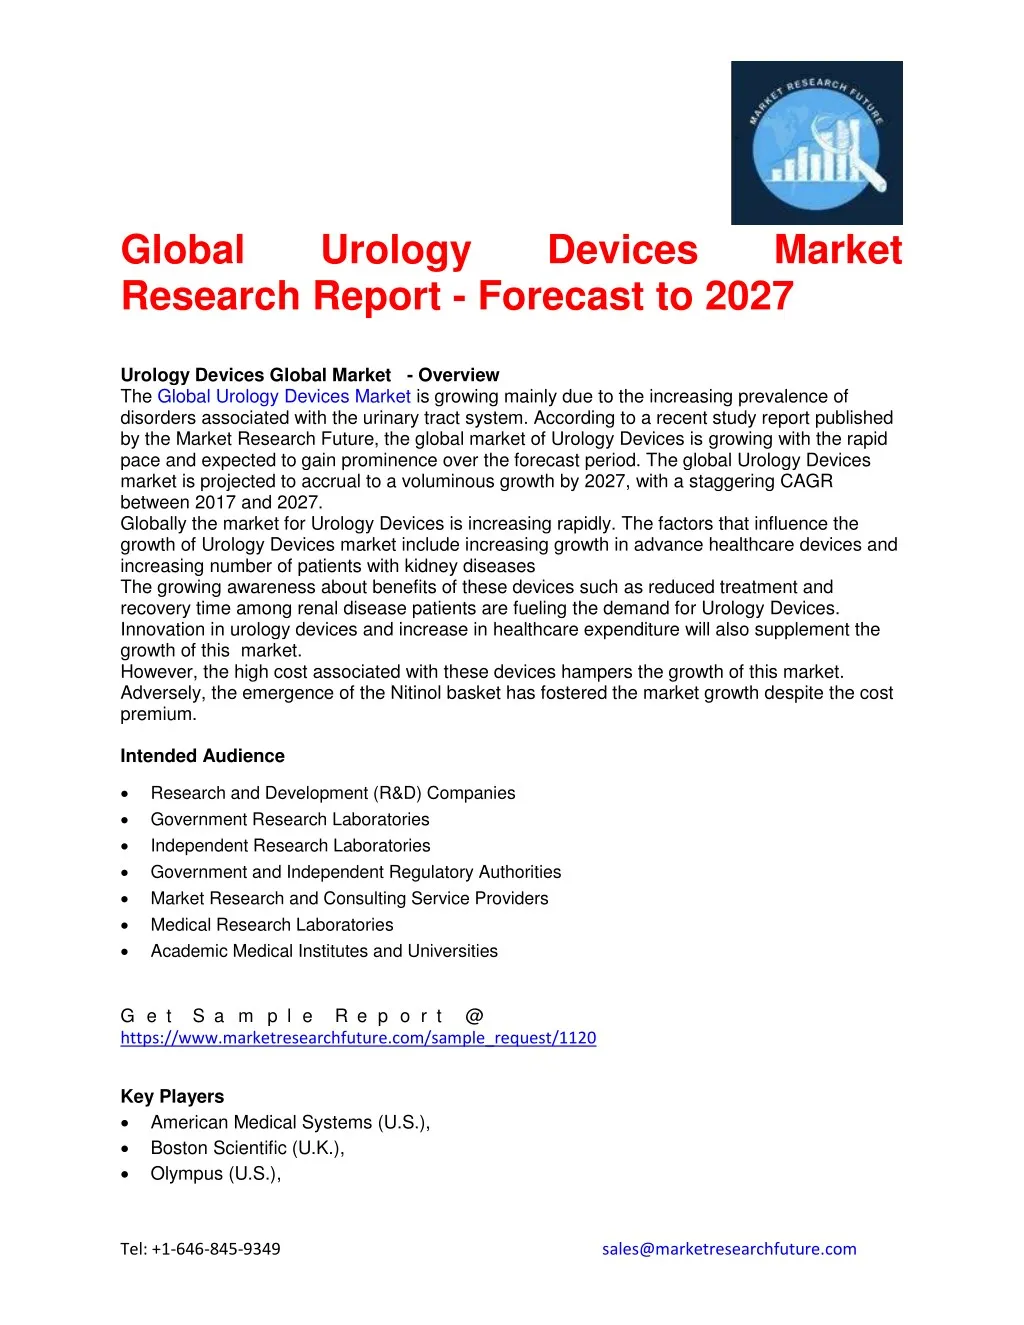 global research report forecast to 2027 urology